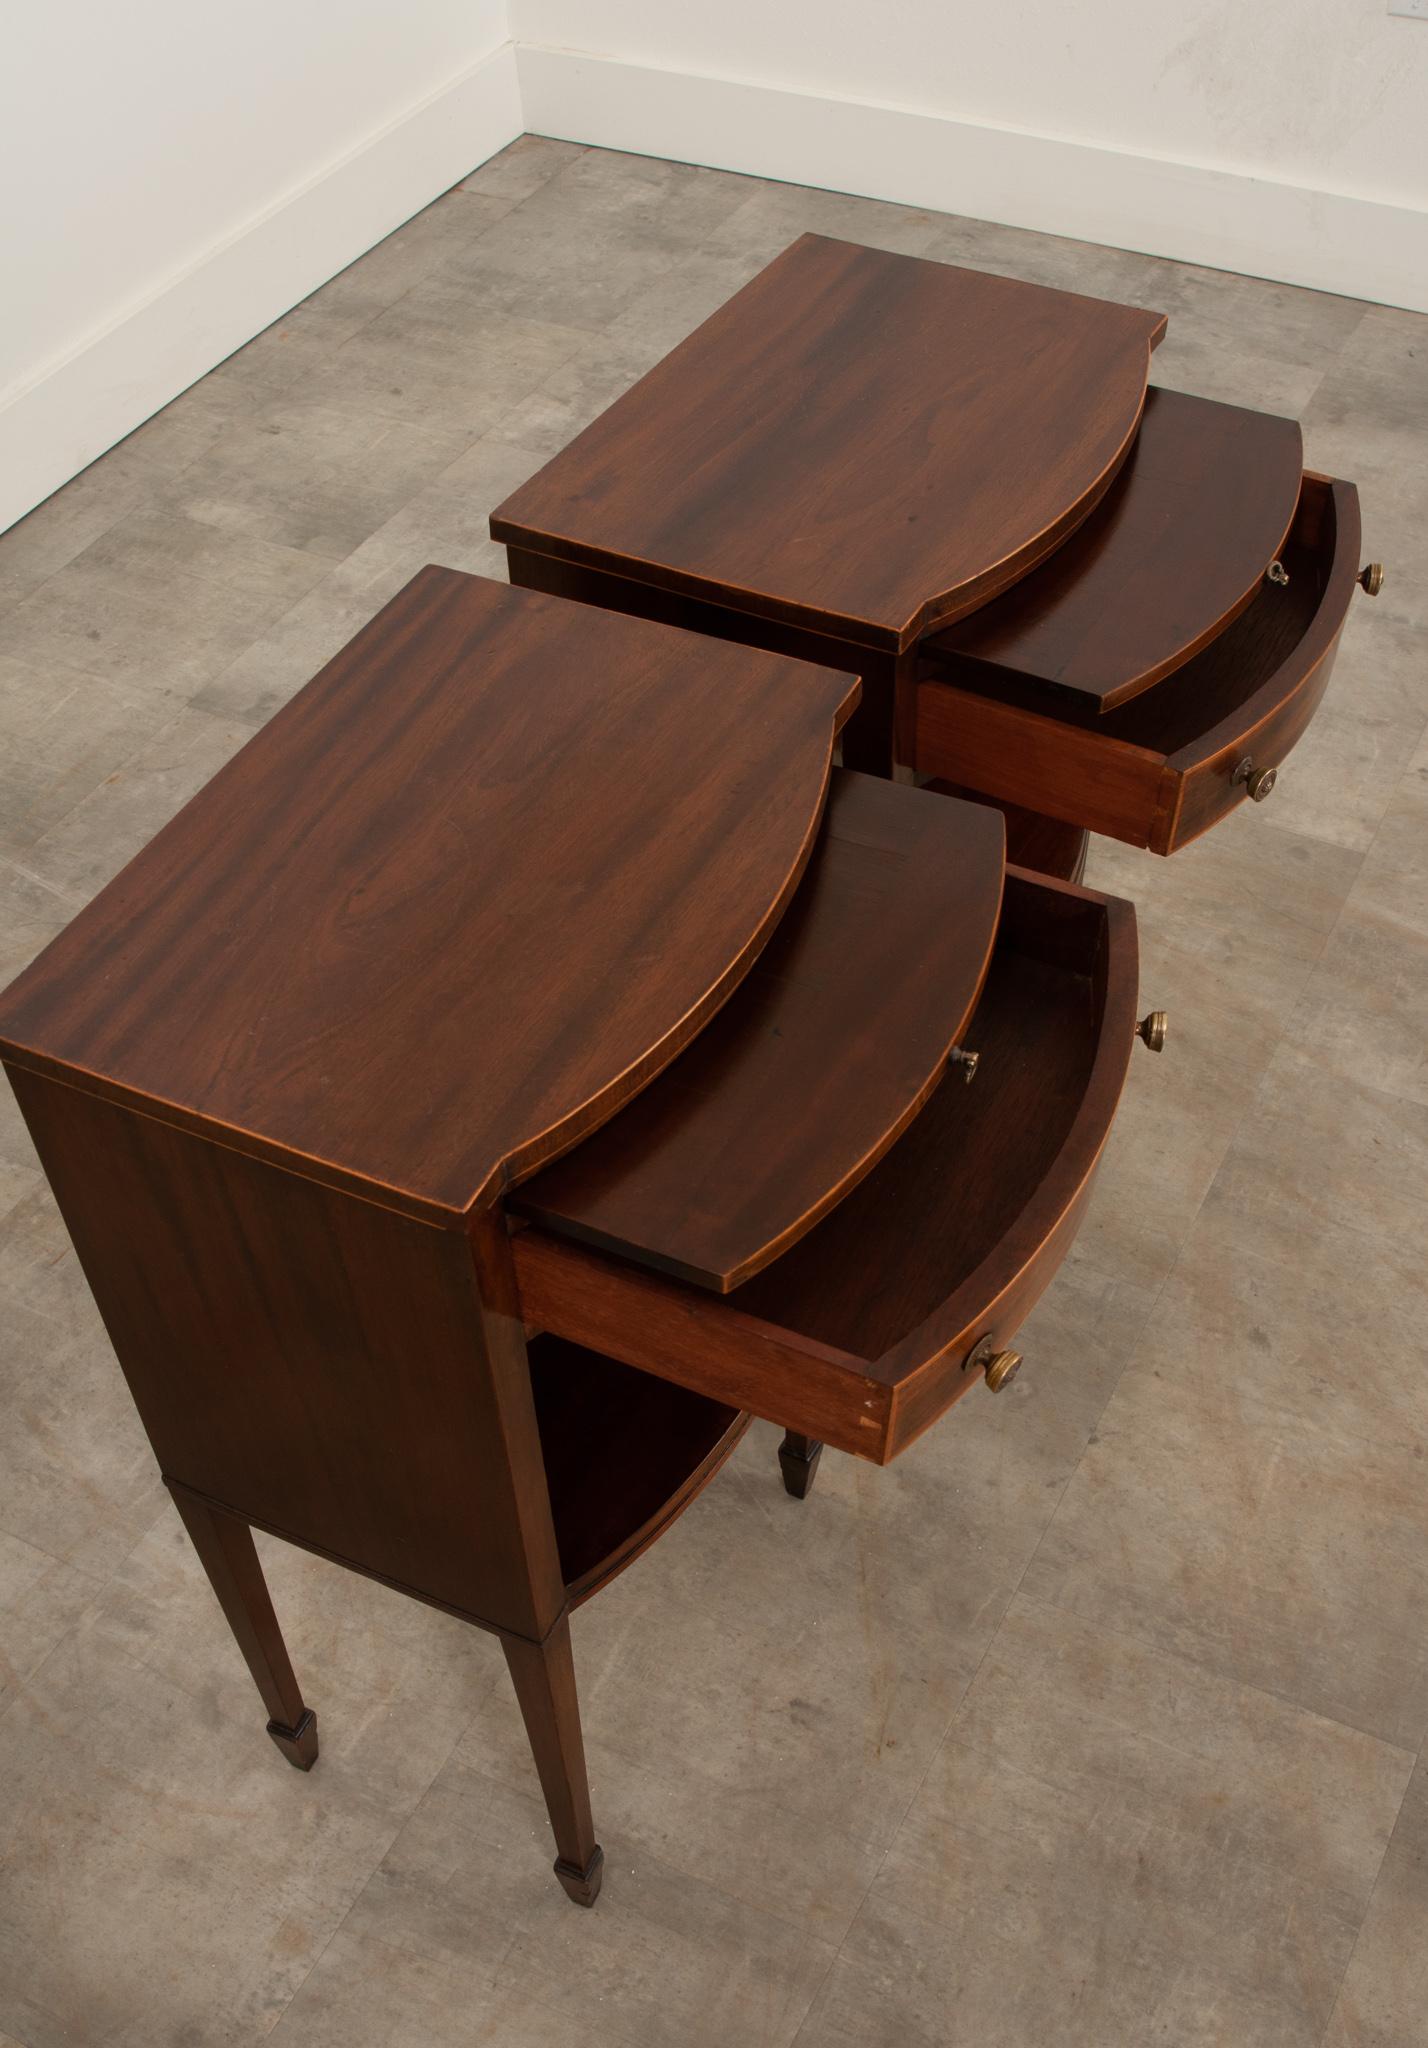 Hand-Crafted English Pair of Mahogany Bedside Tables